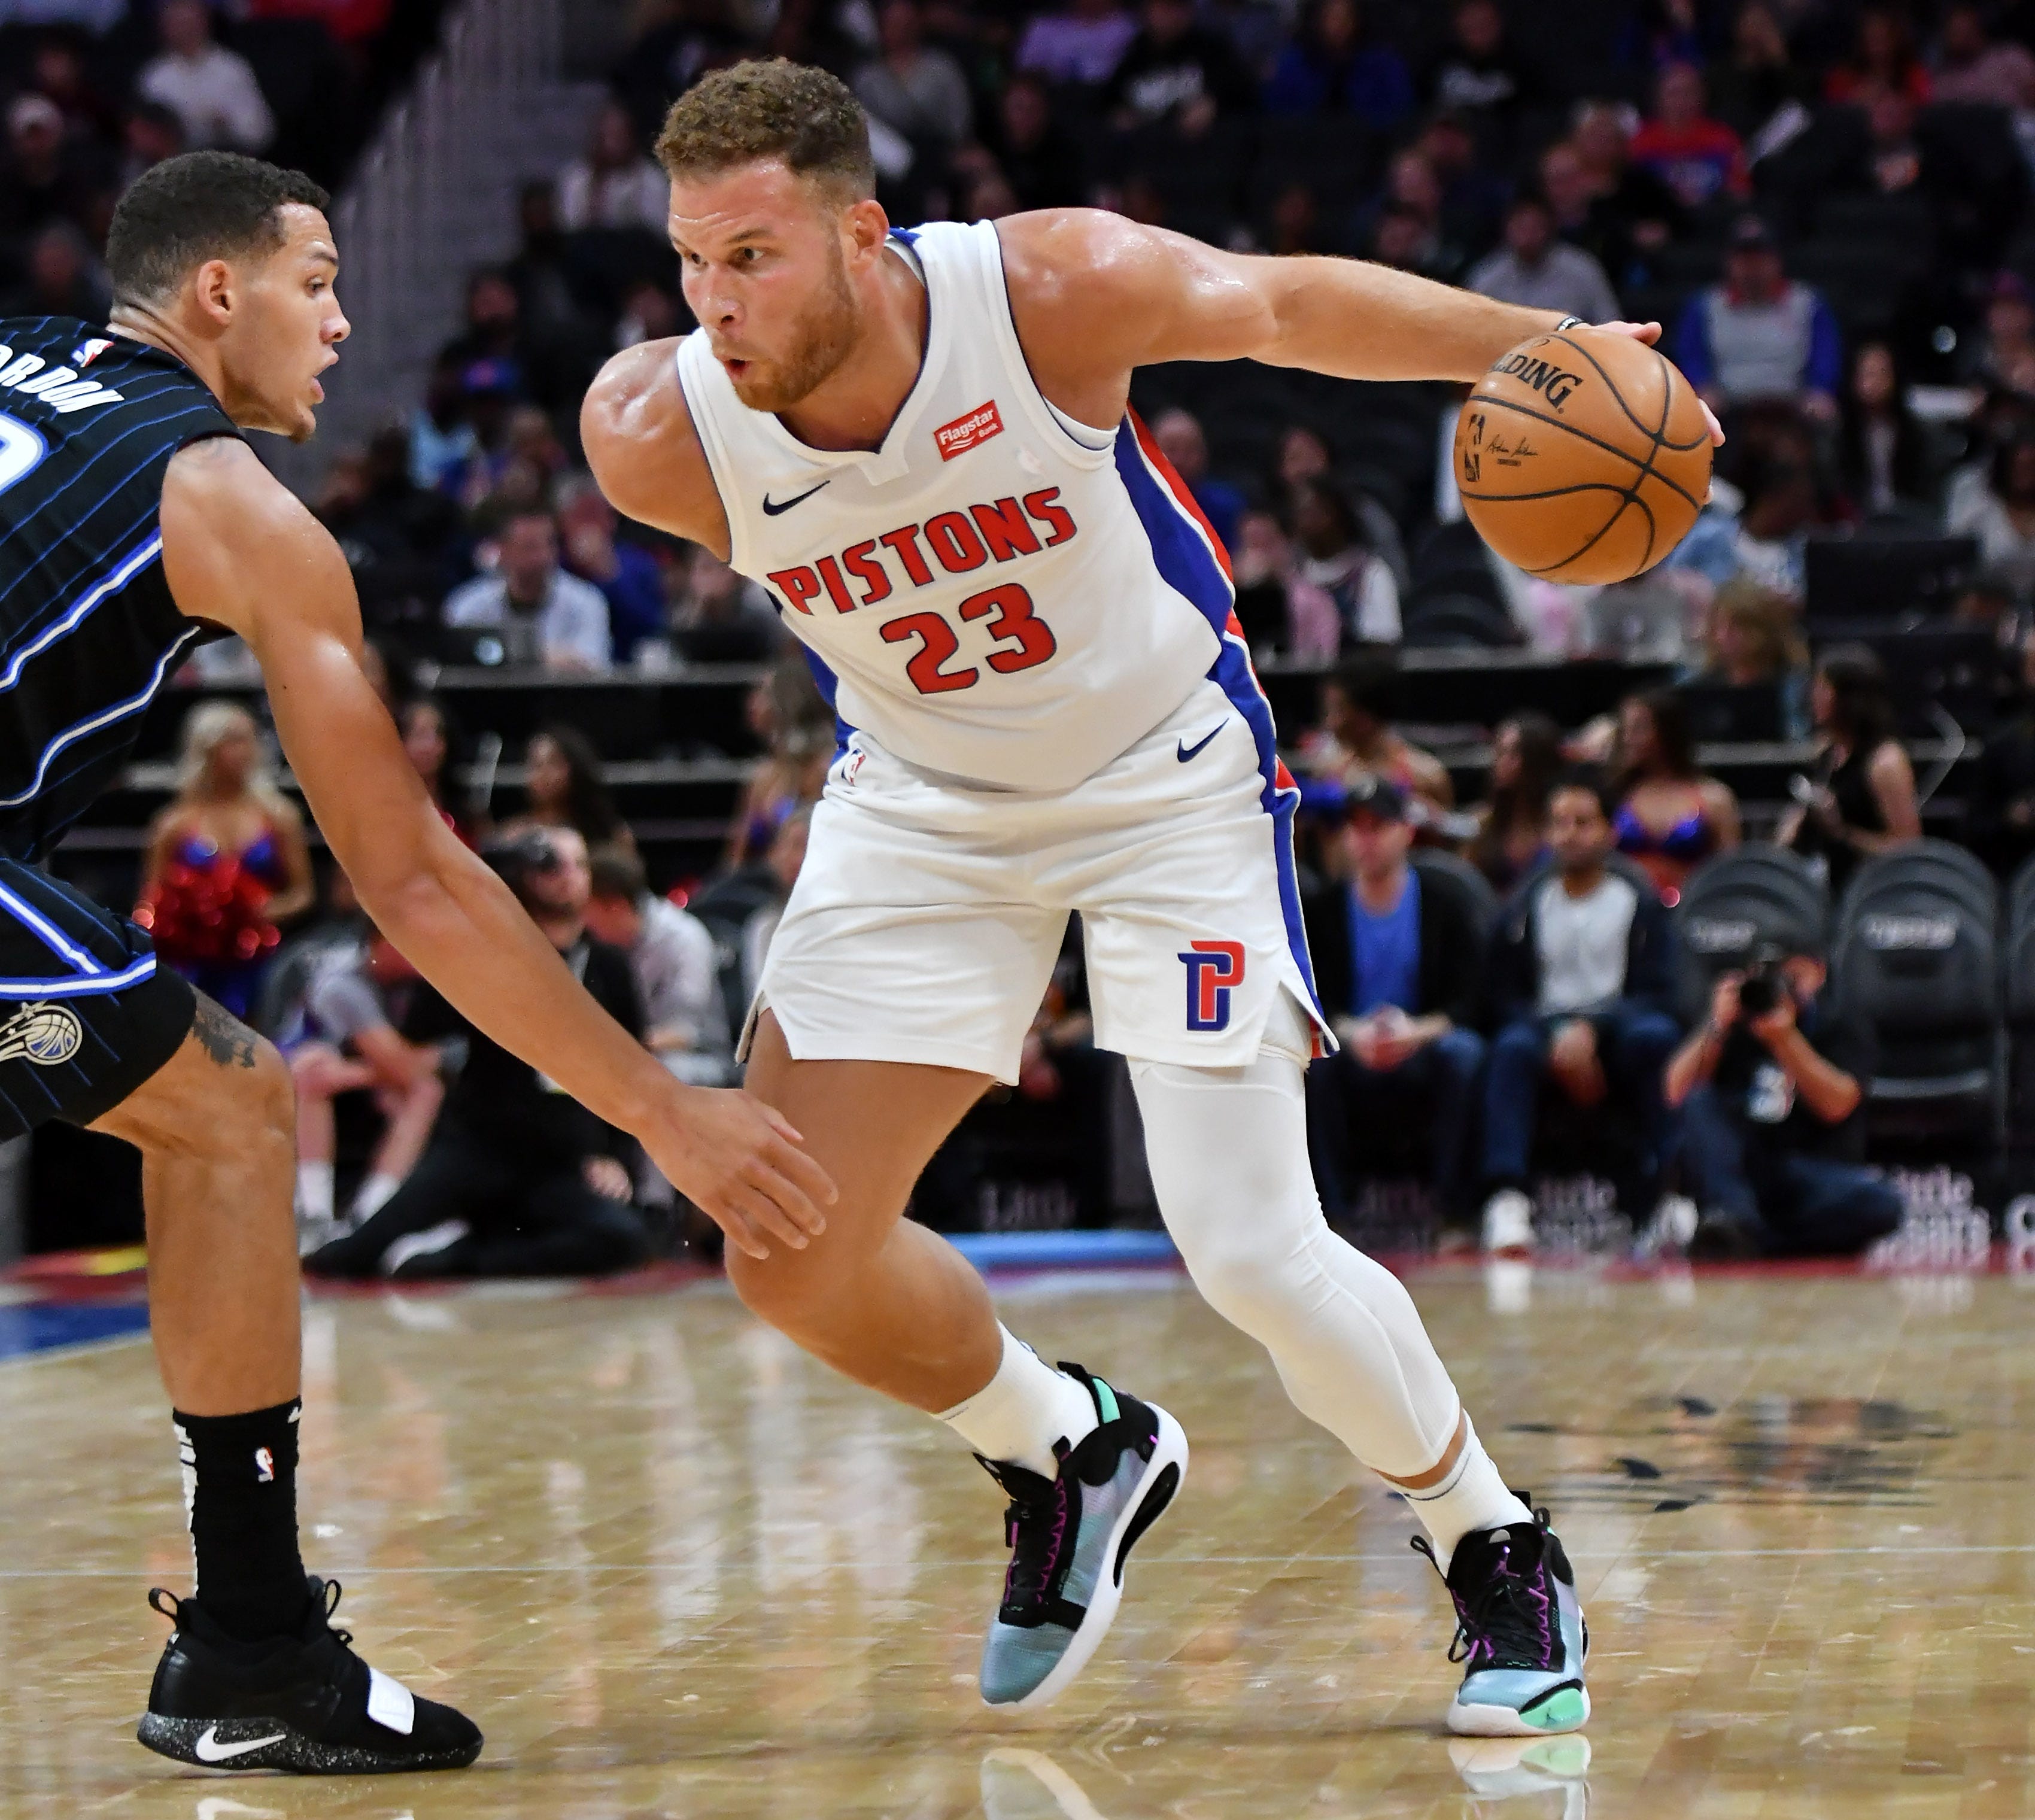 After missing the first nine games of the season because of knee and hamstring issues, Pistons forward Blake Griffin has been cleared to resume all basketball activities.